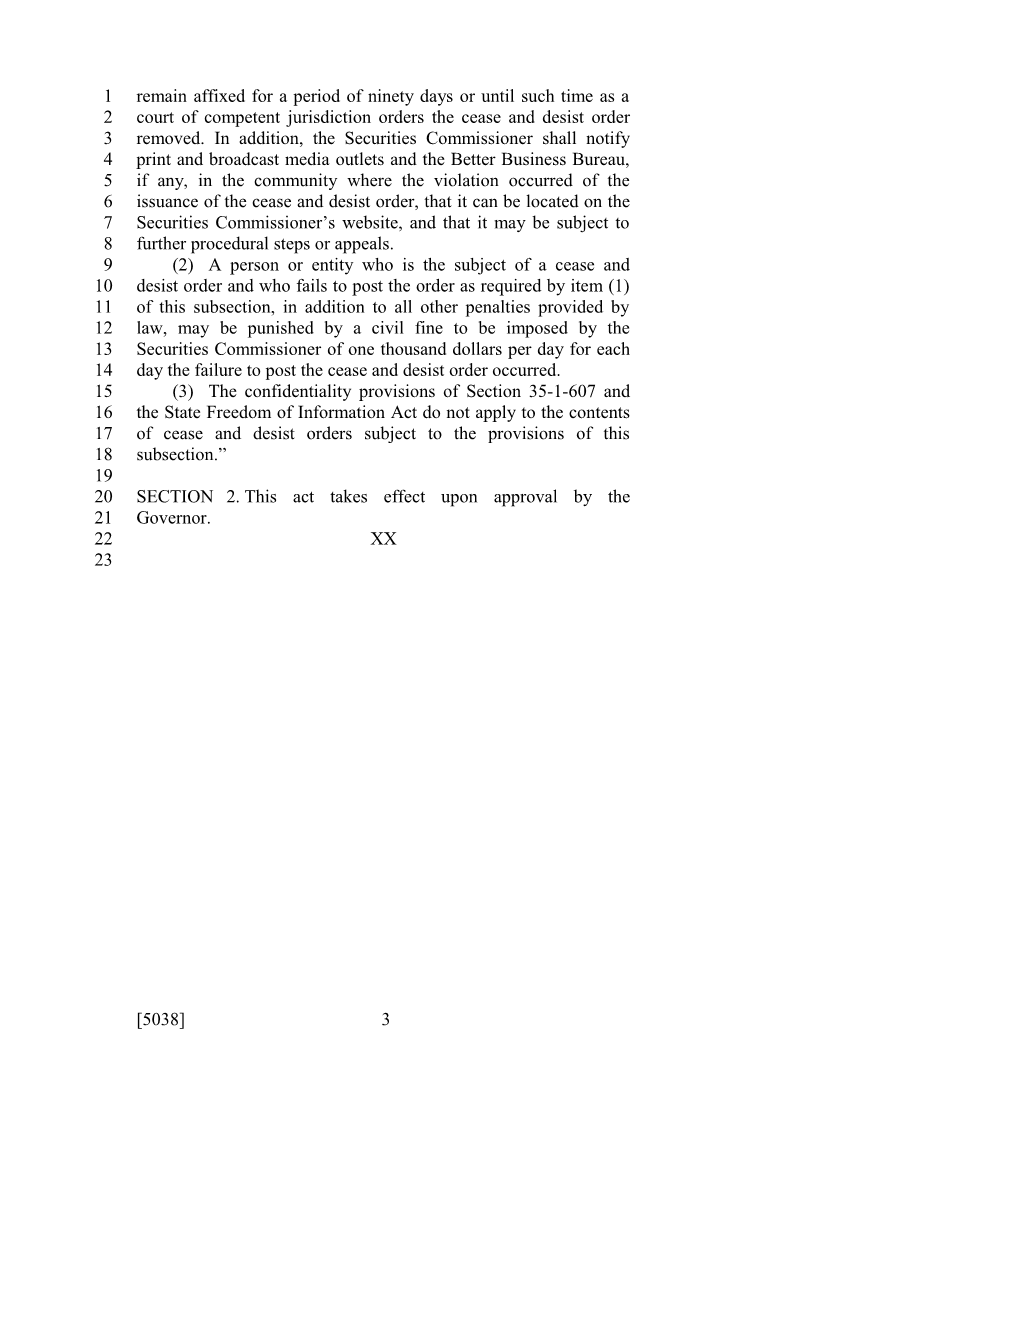 2011-2012 Bill 5038: Cease and Desist Orders Issued by Securities Commissioner - South